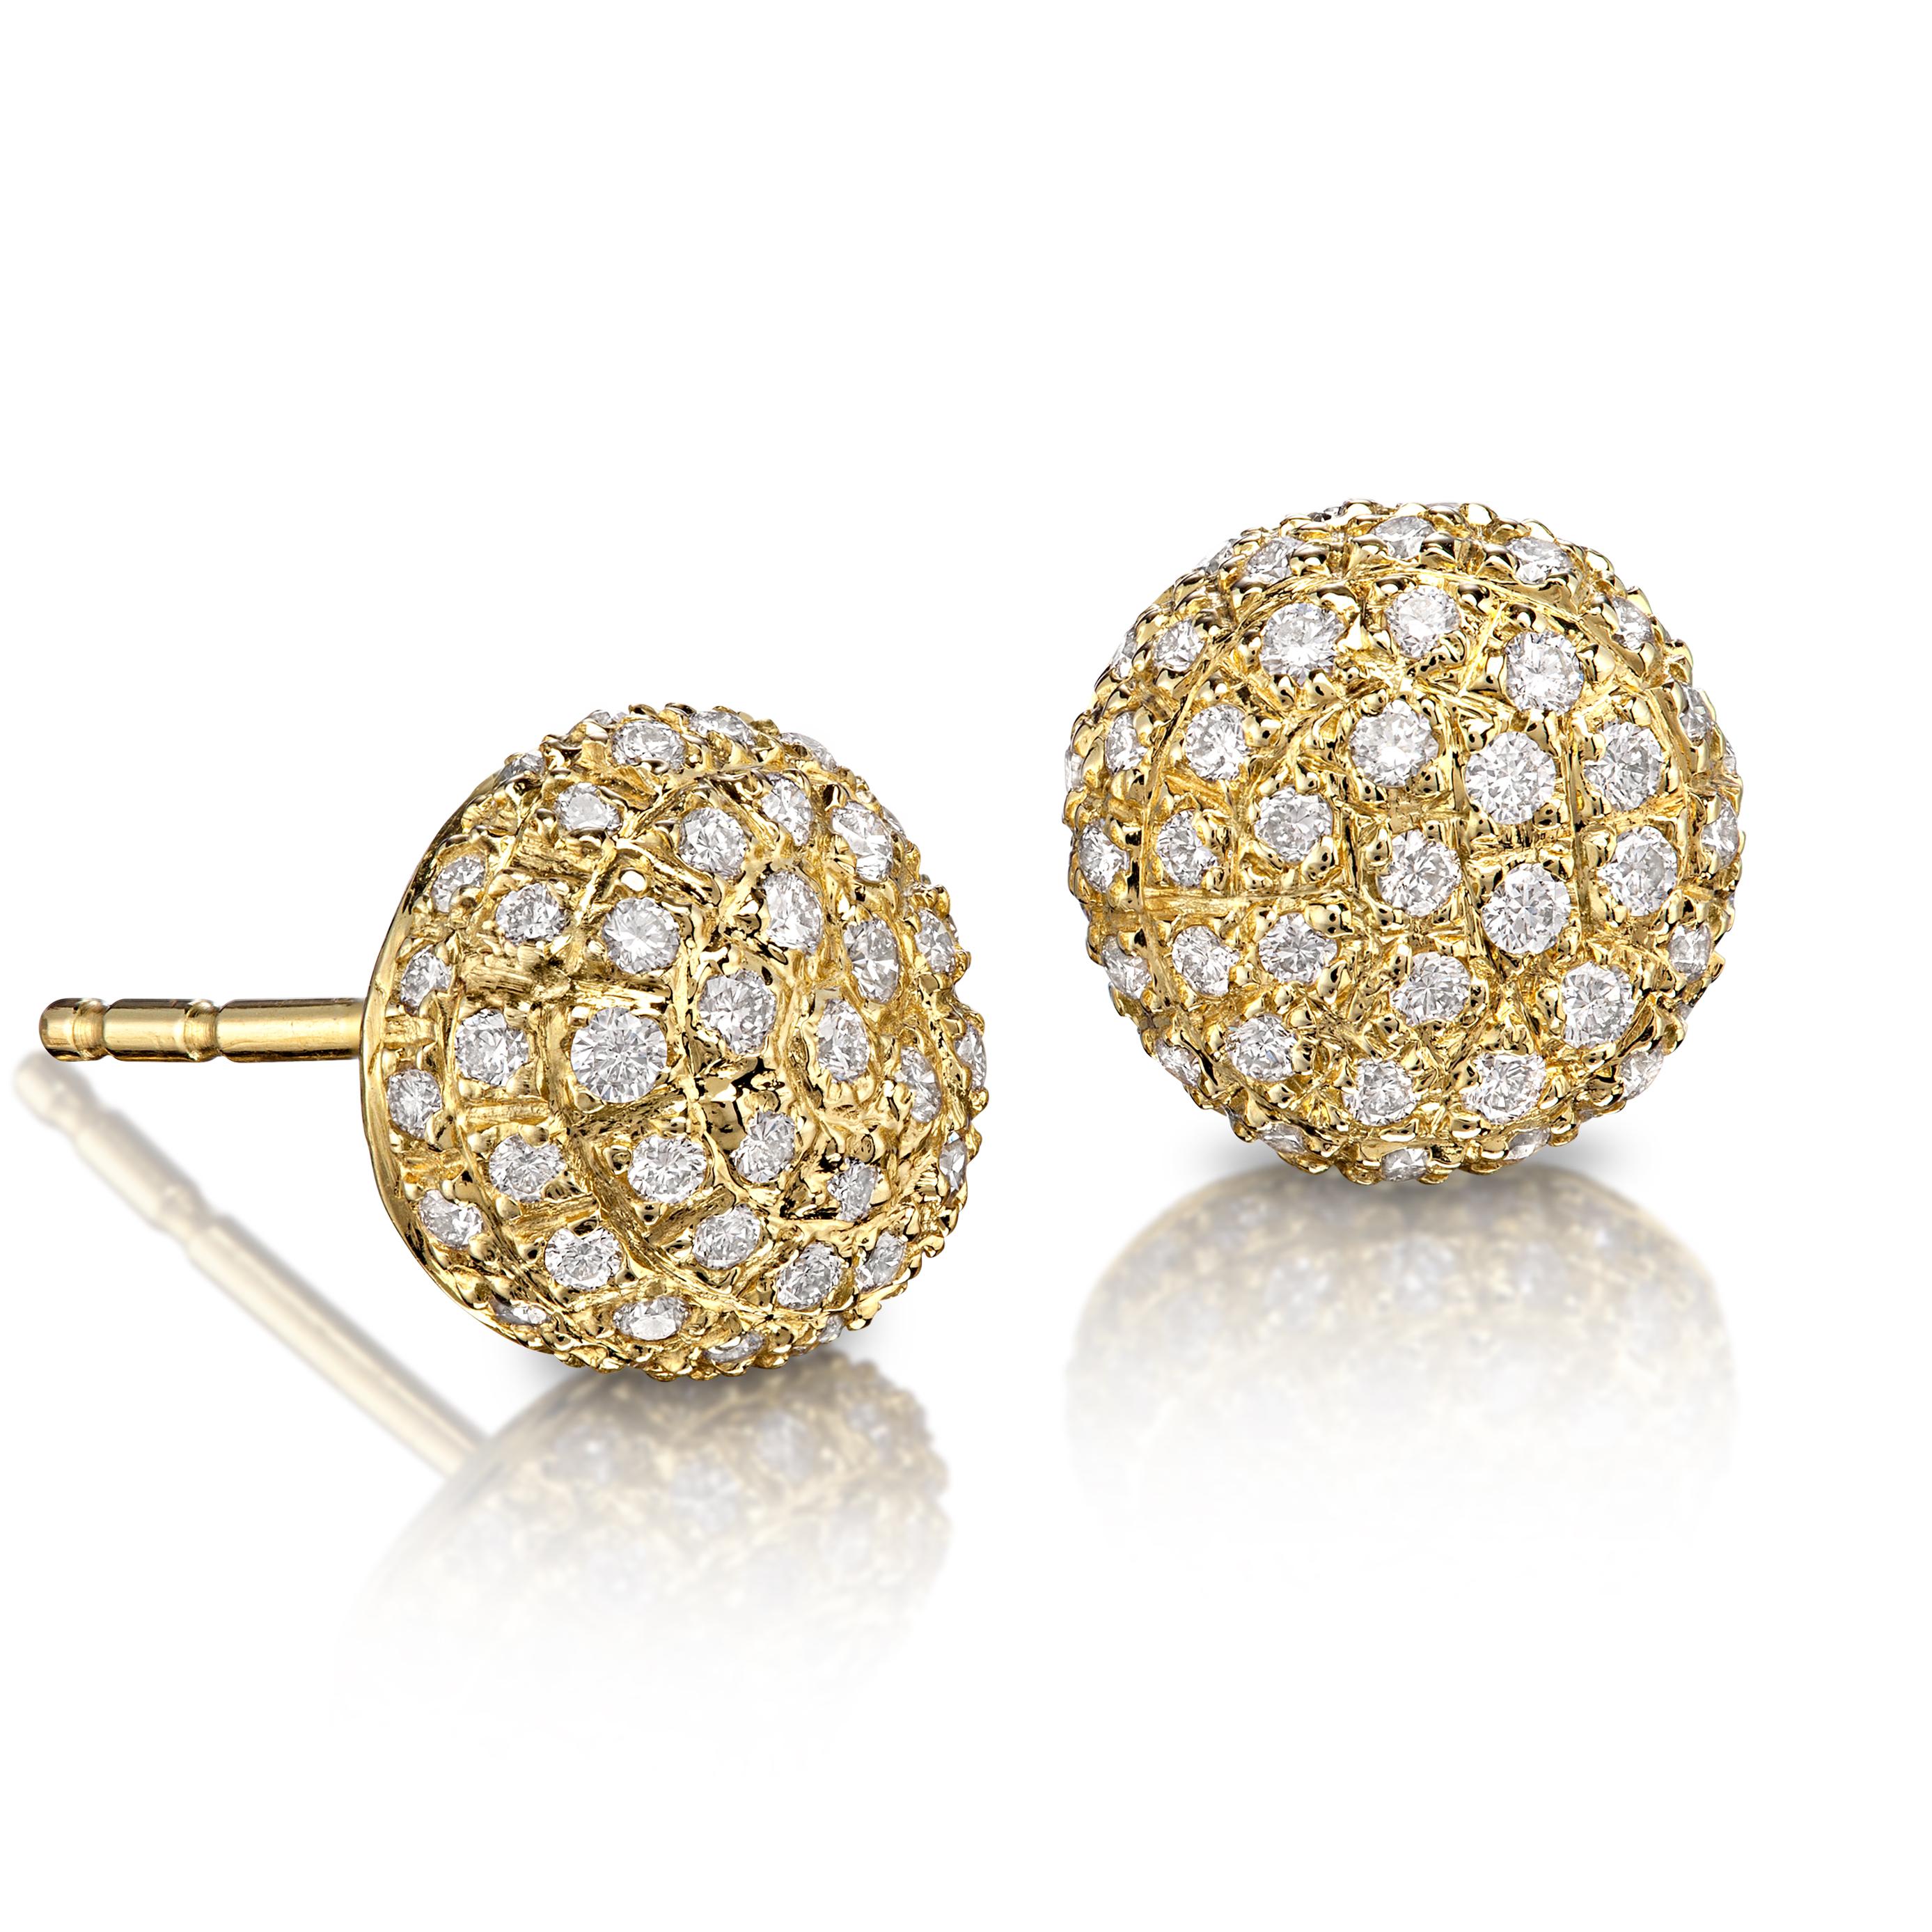 Pebble Stud Earrings hand-fabricated in 18k yellow gold by award-winning master contemporary jewelry maker John Iversen featuring the artist's signature pebble element set with shimmering round brilliant-cut white diamonds and finished with 18k